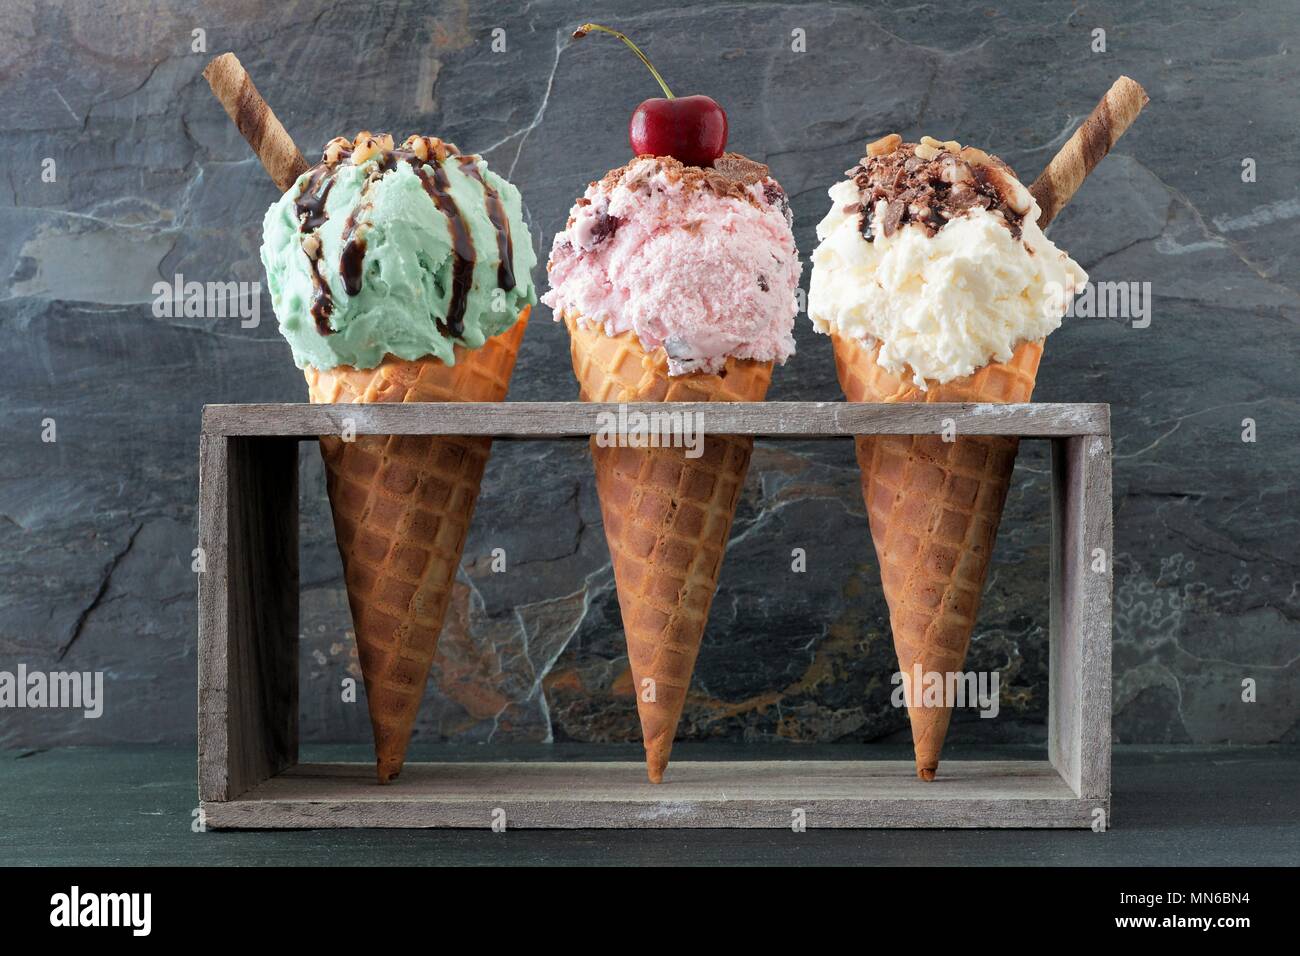 Pistachio, cherry and vanilla ice cream with topping in waffle cones in rustic wood holder over a slate background Stock Photo